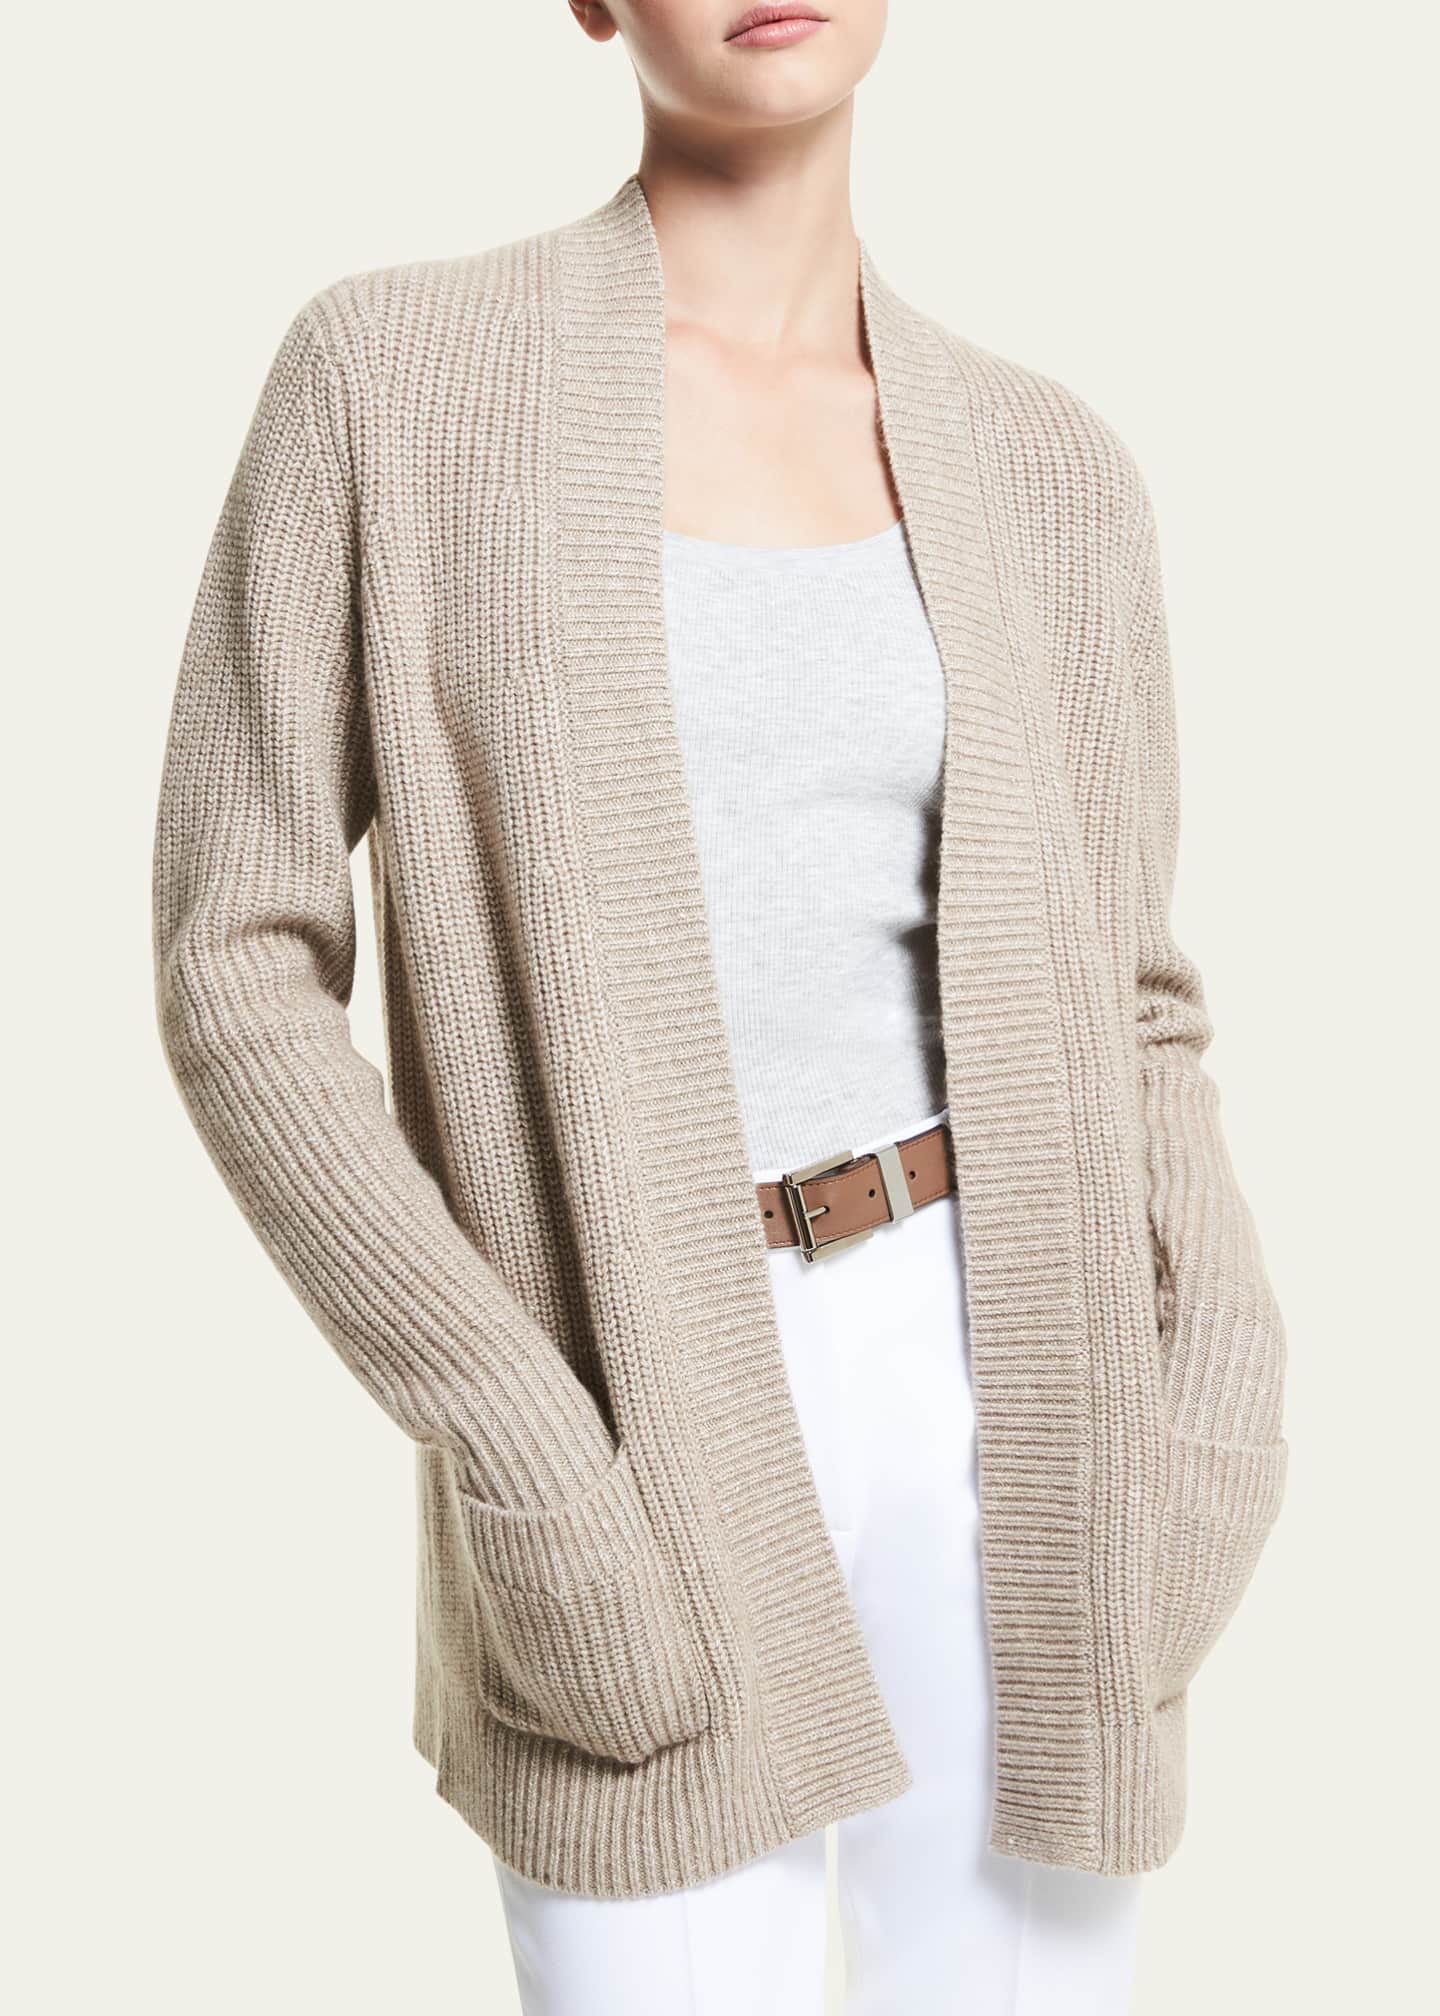 Michael Kors Collection Open-Front Ribbed Cashmere Shaker Cardigan -  Bergdorf Goodman